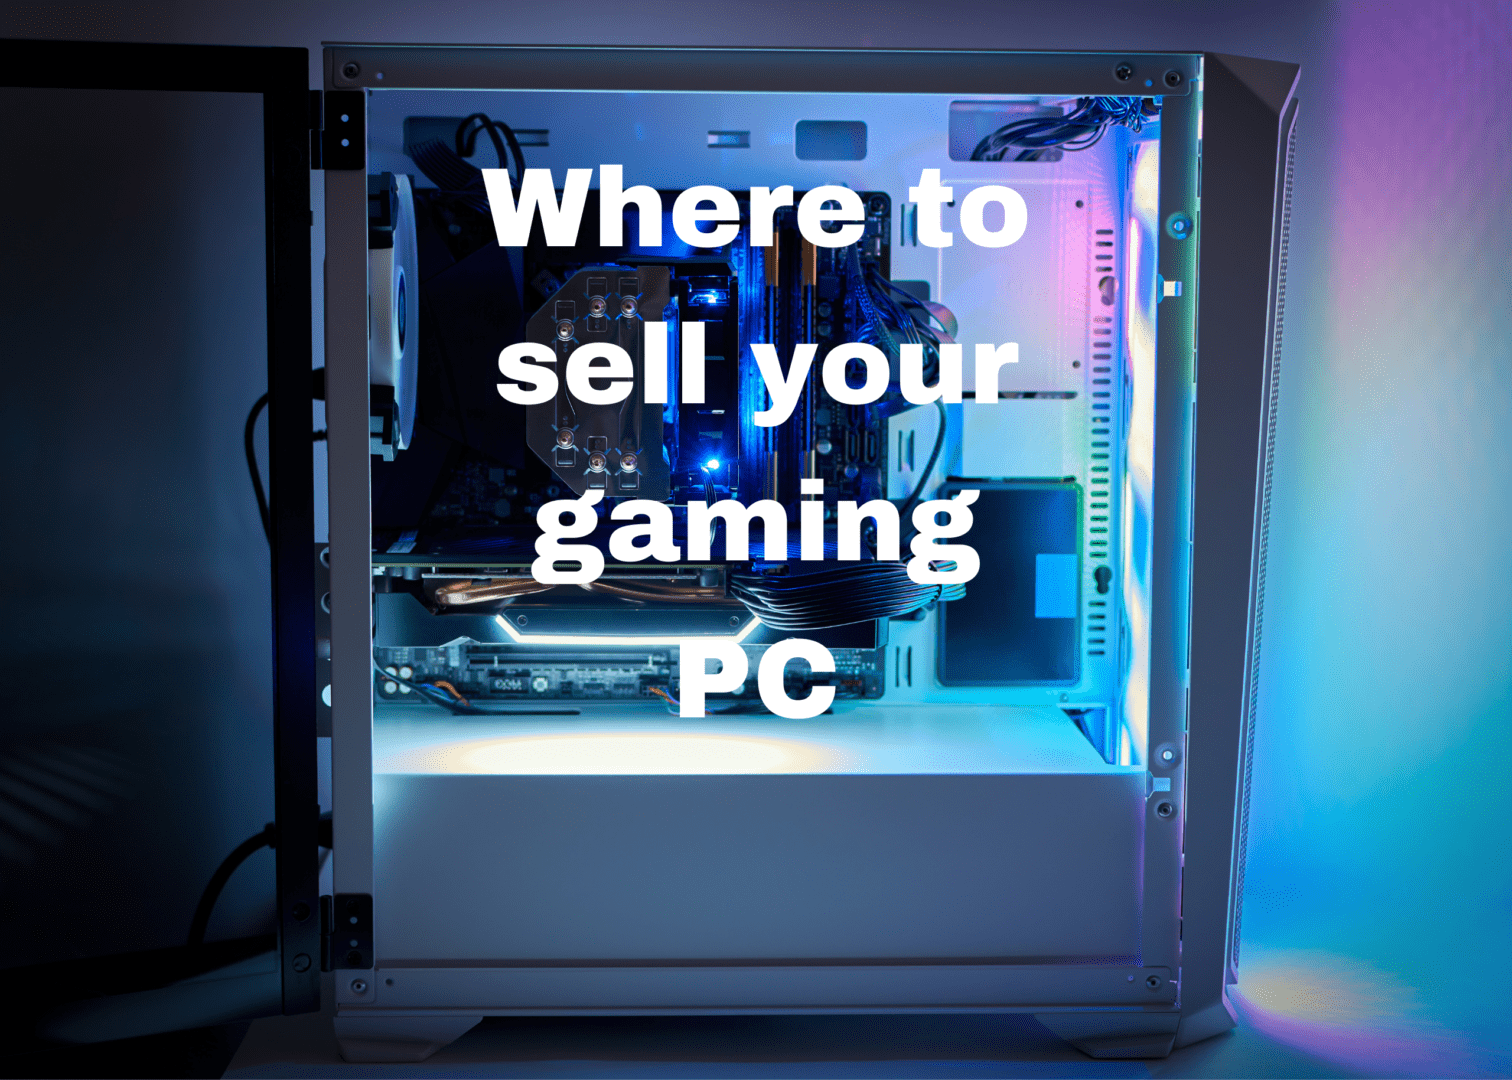 Where to sell your gaming PC